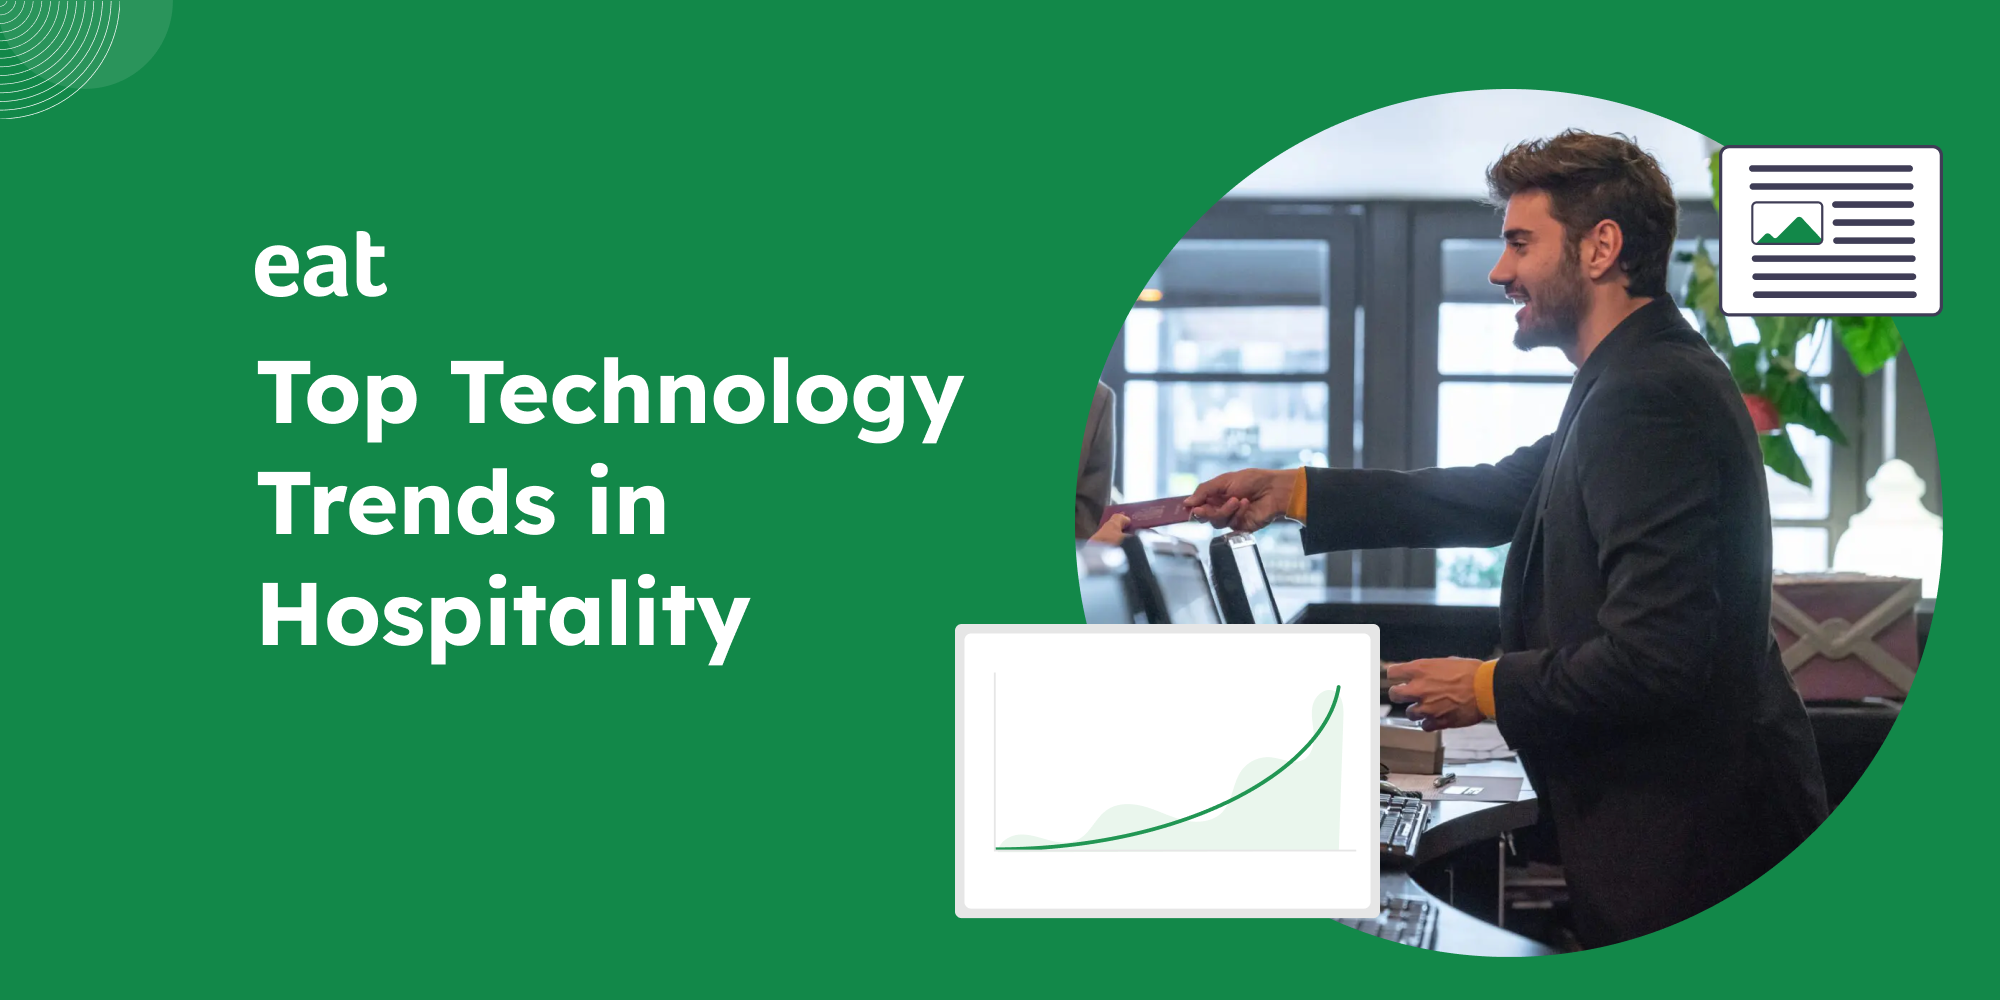 Top Technology Trends in Hospitality